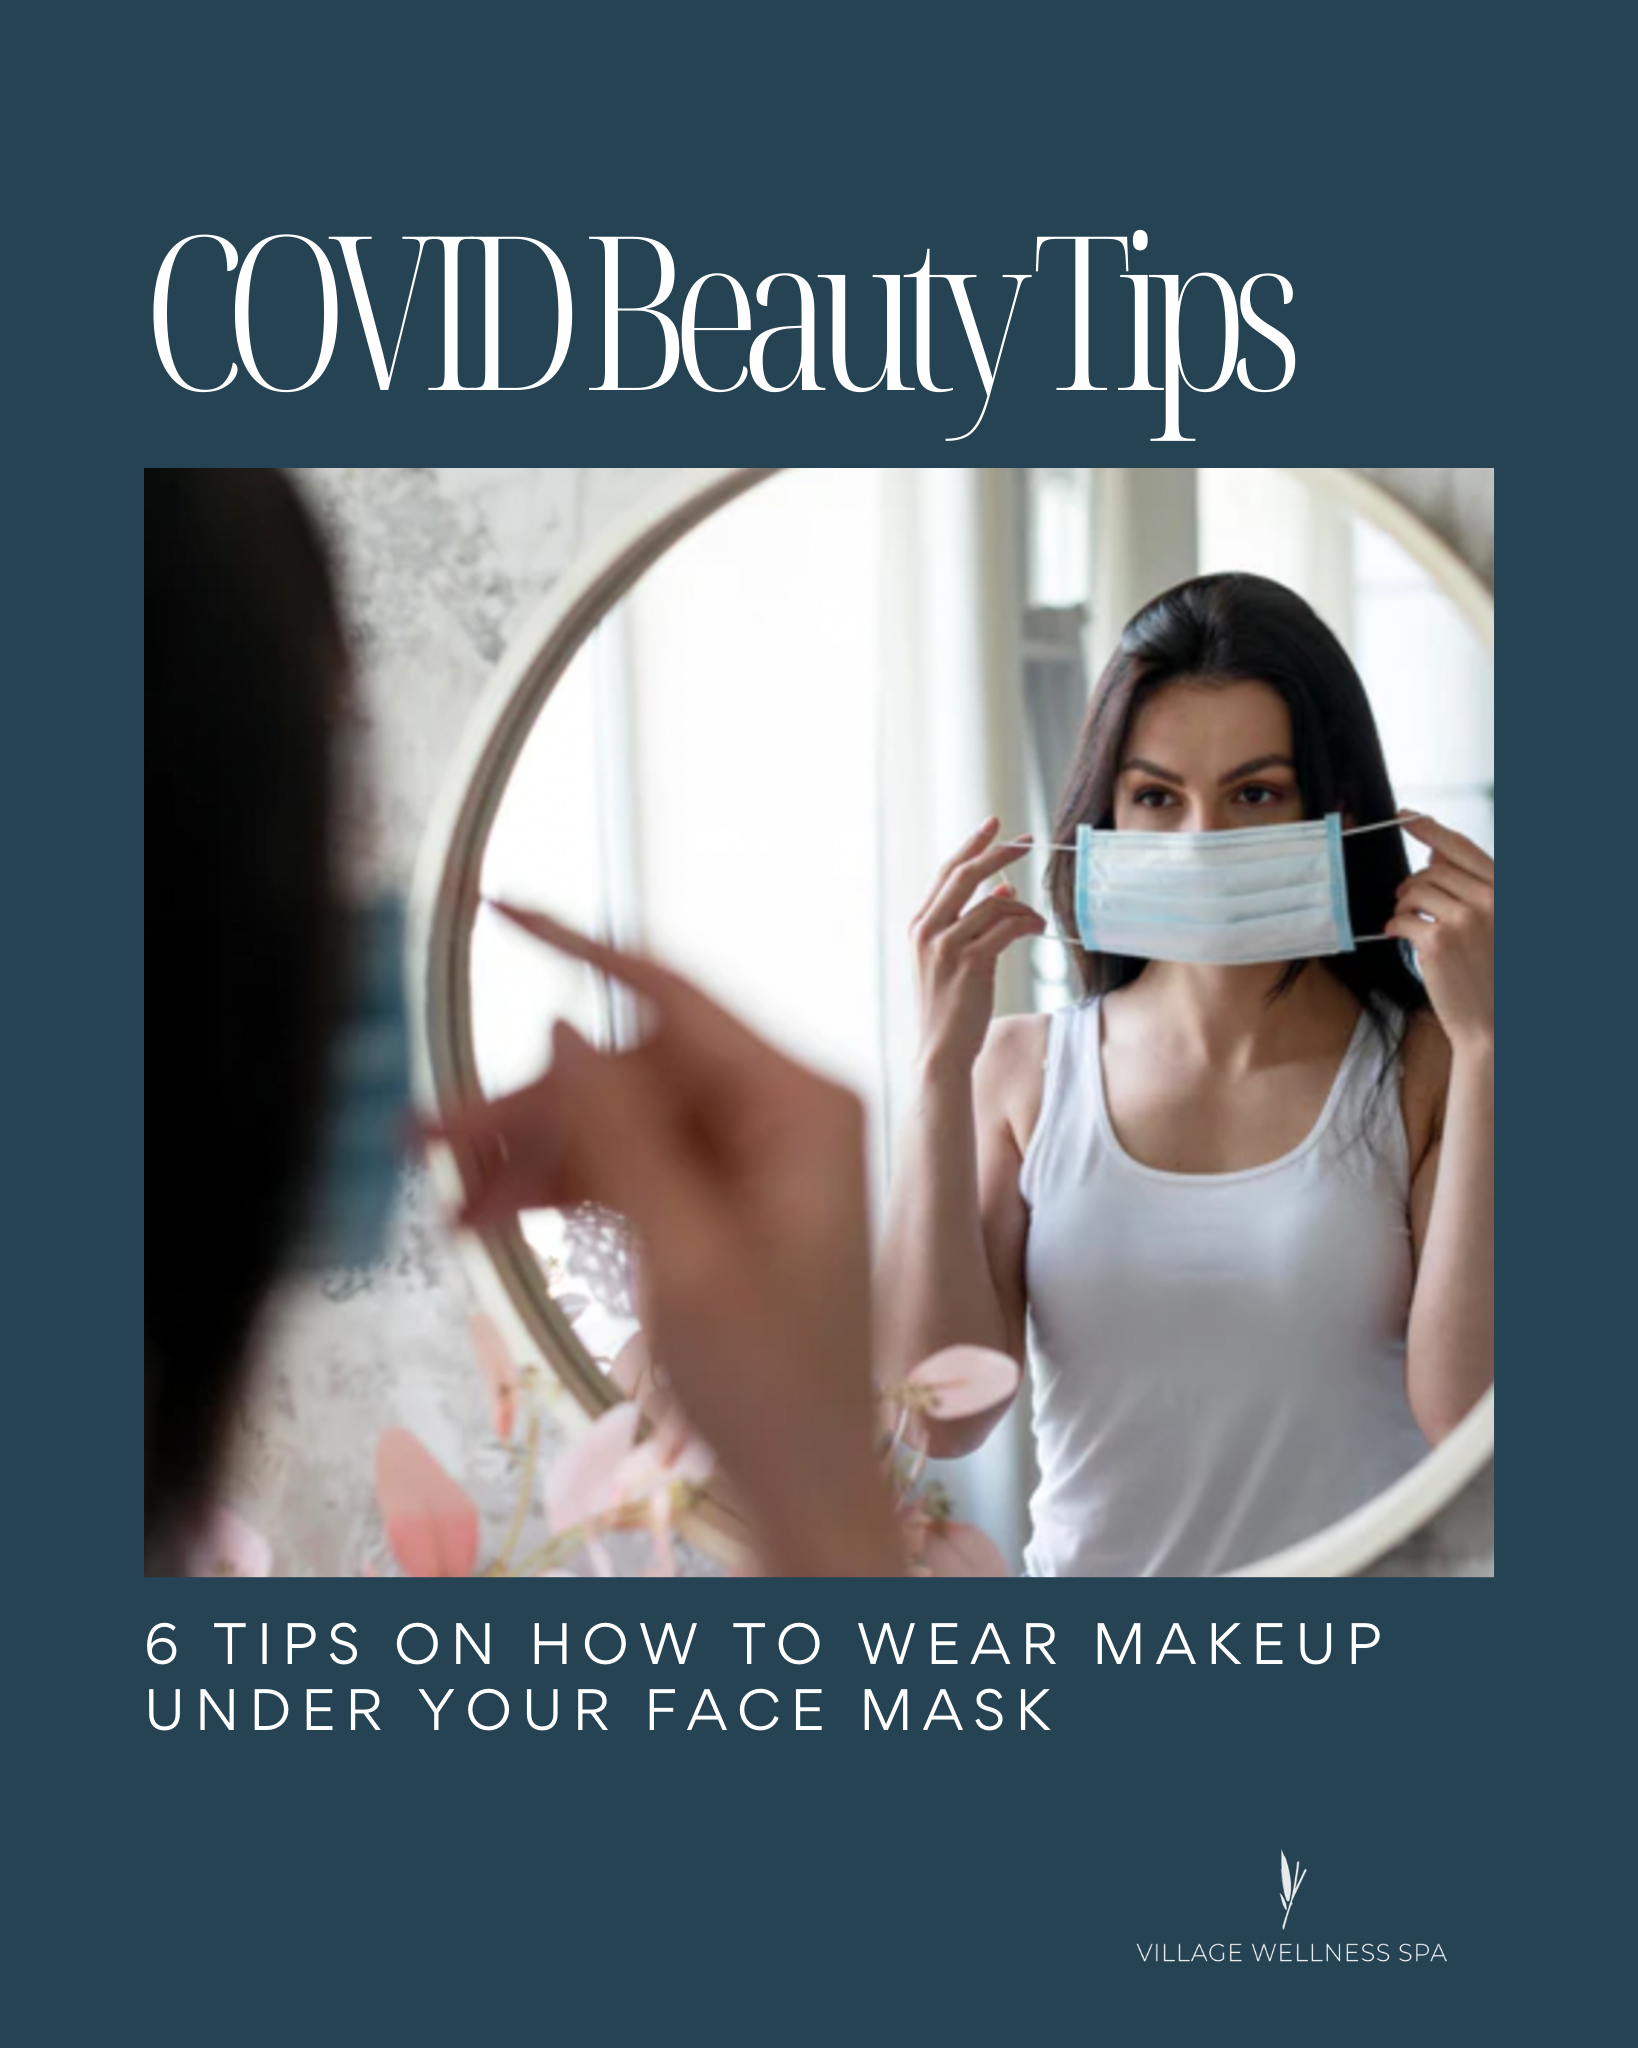 6 Tips on How to Wear Makeup Under Your Face Mask